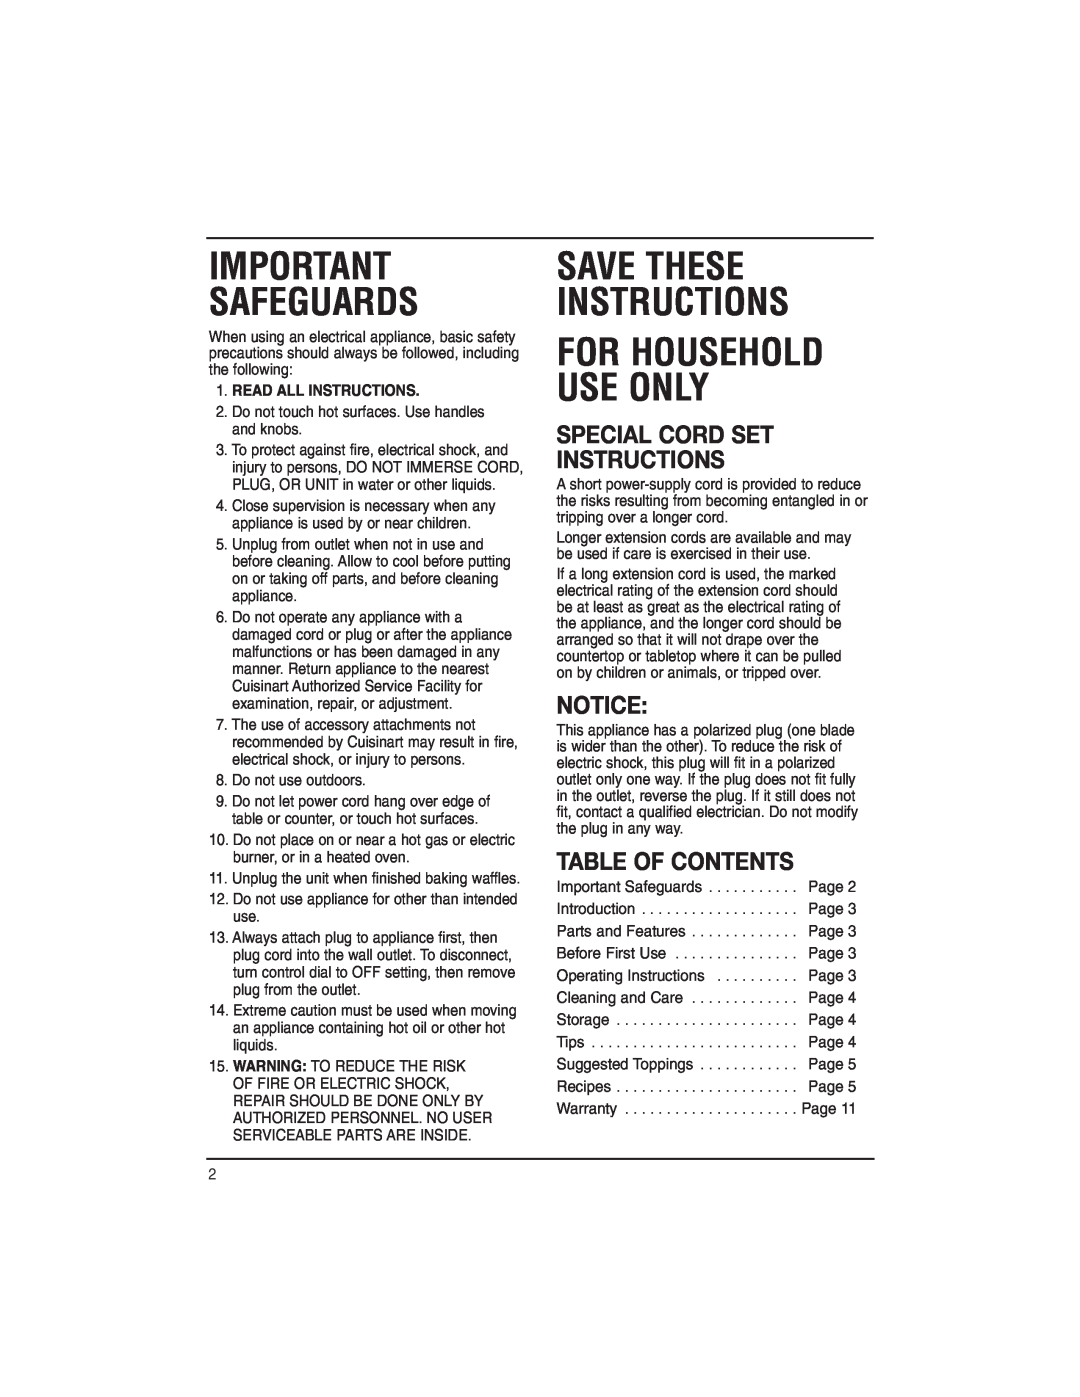 Cuisinart WAF-RC manual For Household Use Only, Special Cord Set Instructions, Table Of Contents, Safeguards 